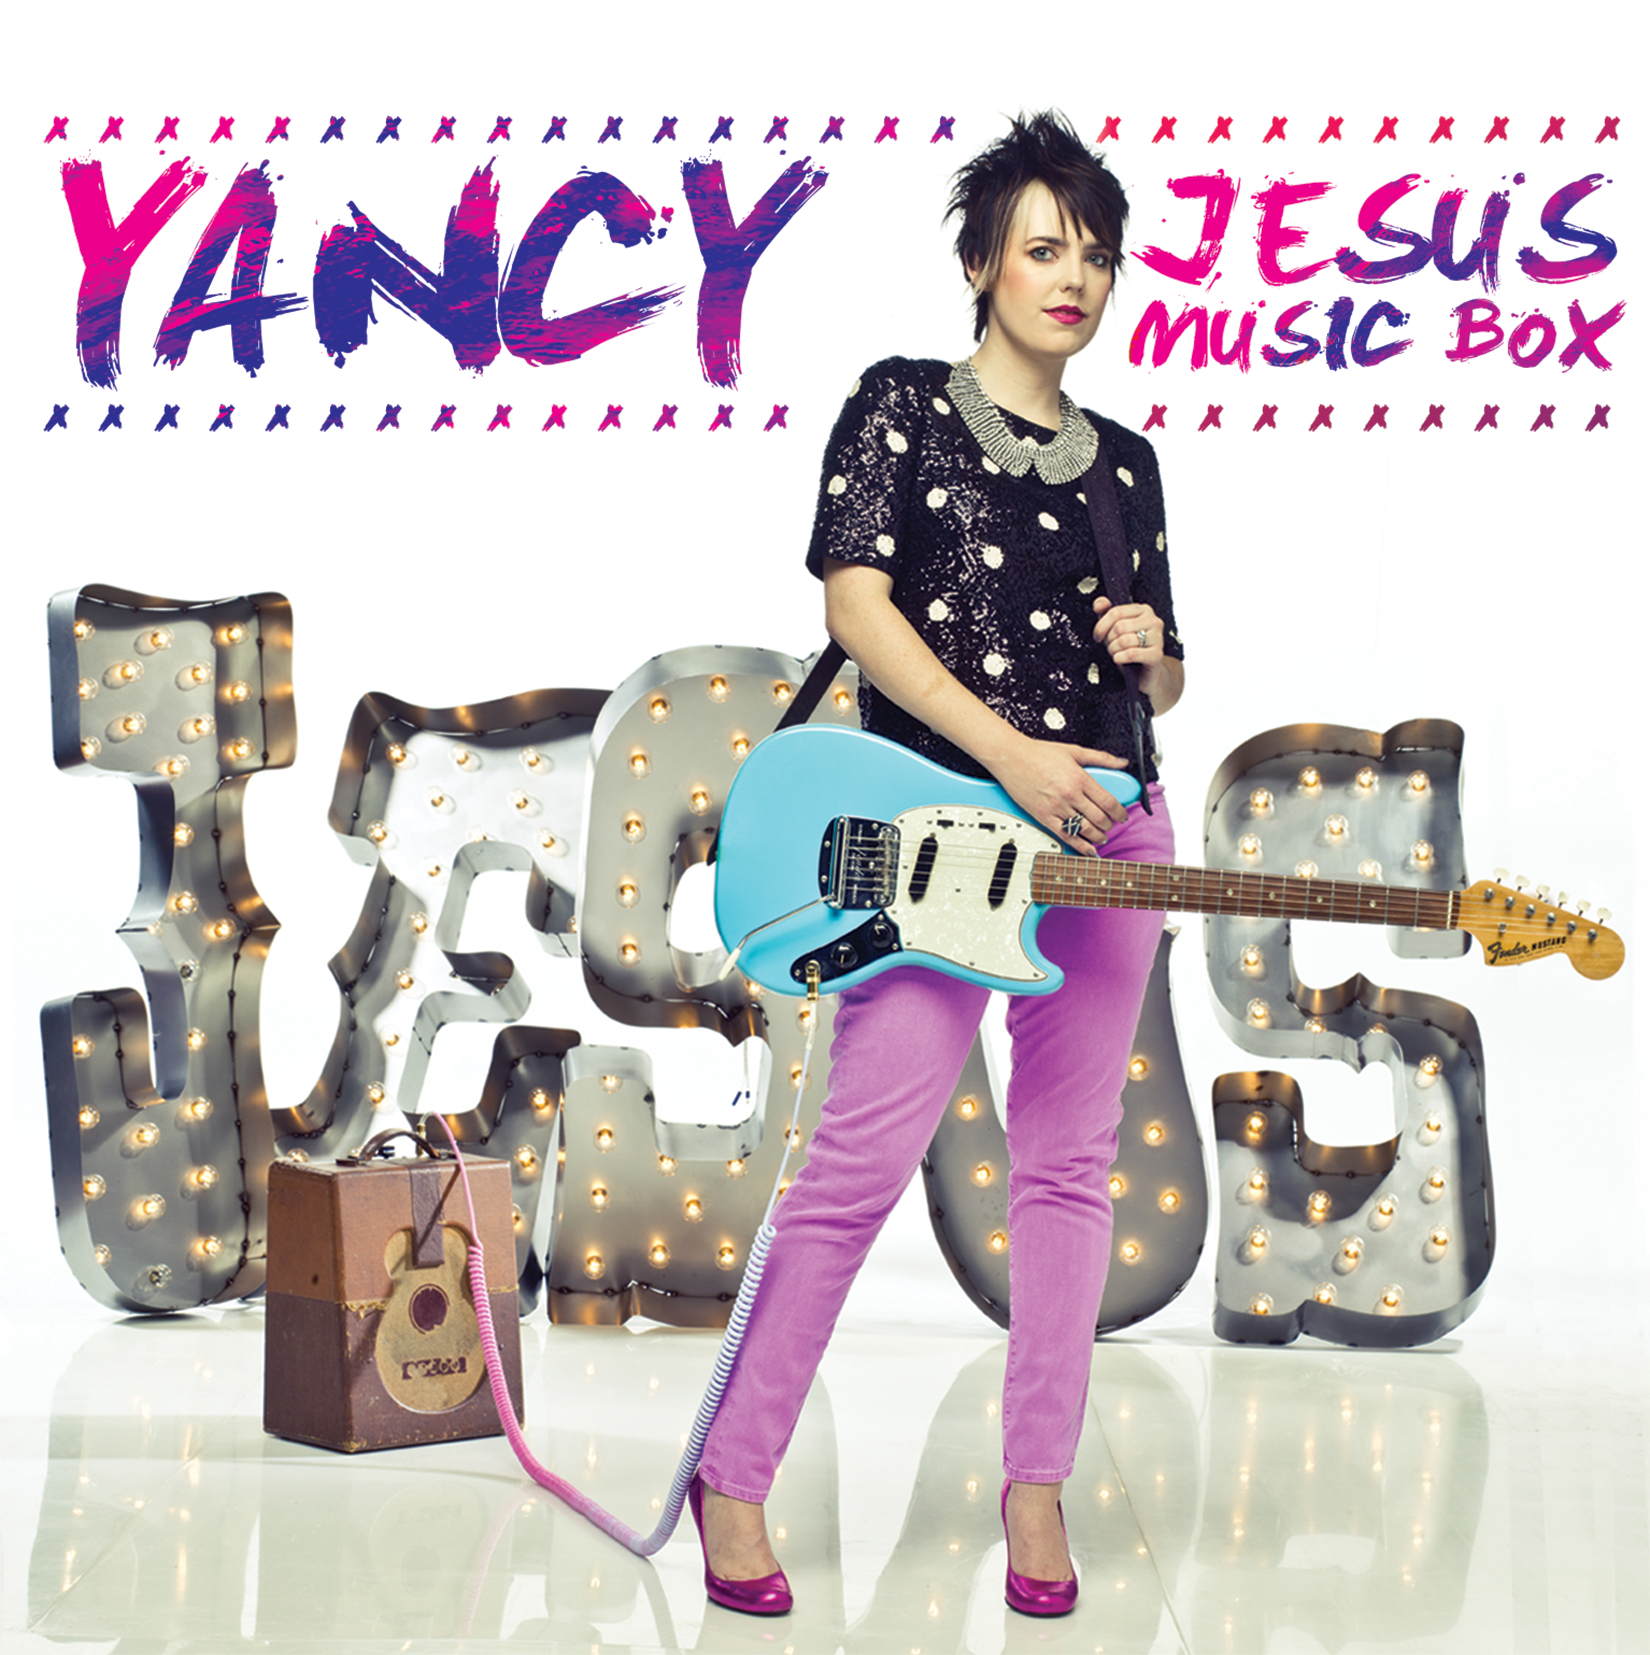 Yancy's New Album Released! And a Giveaway!